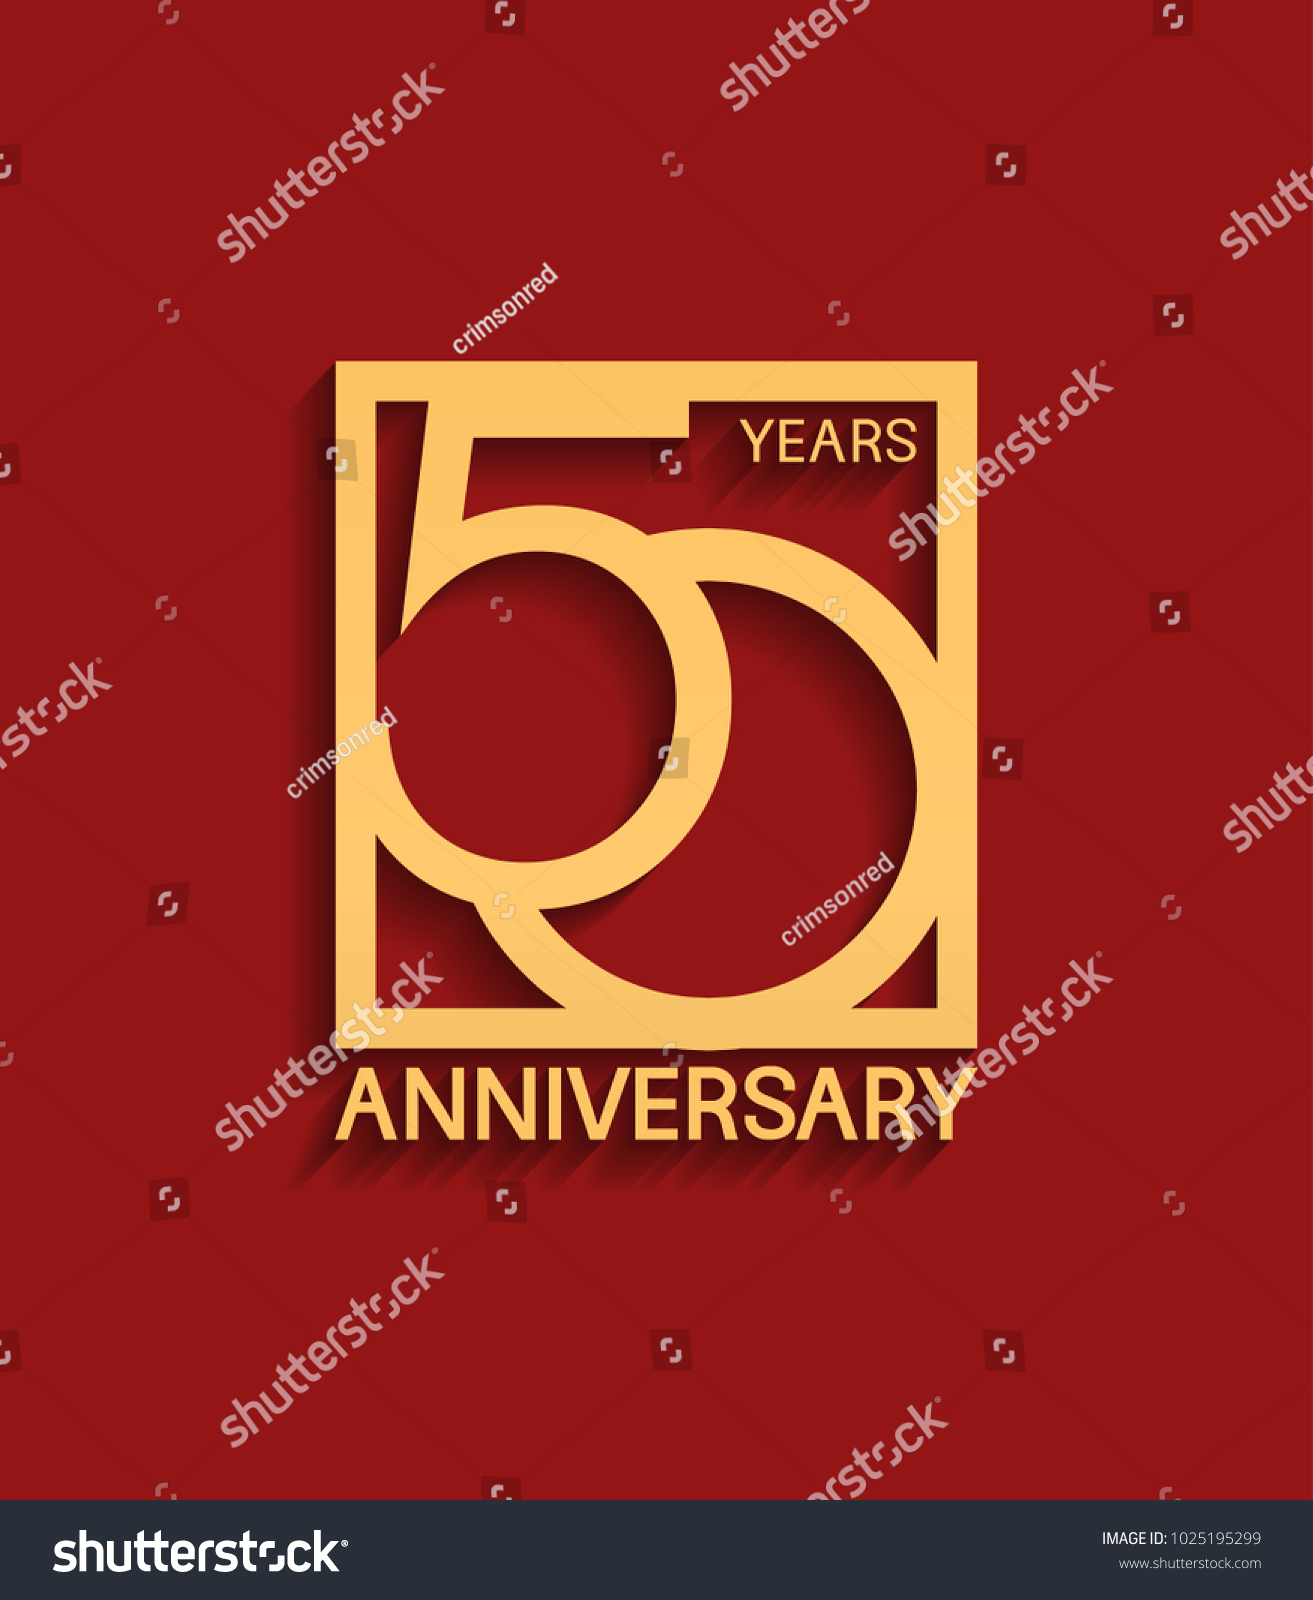 SVG of 50 years anniversary design logotype golden color in square isolated on red background for celebration event svg